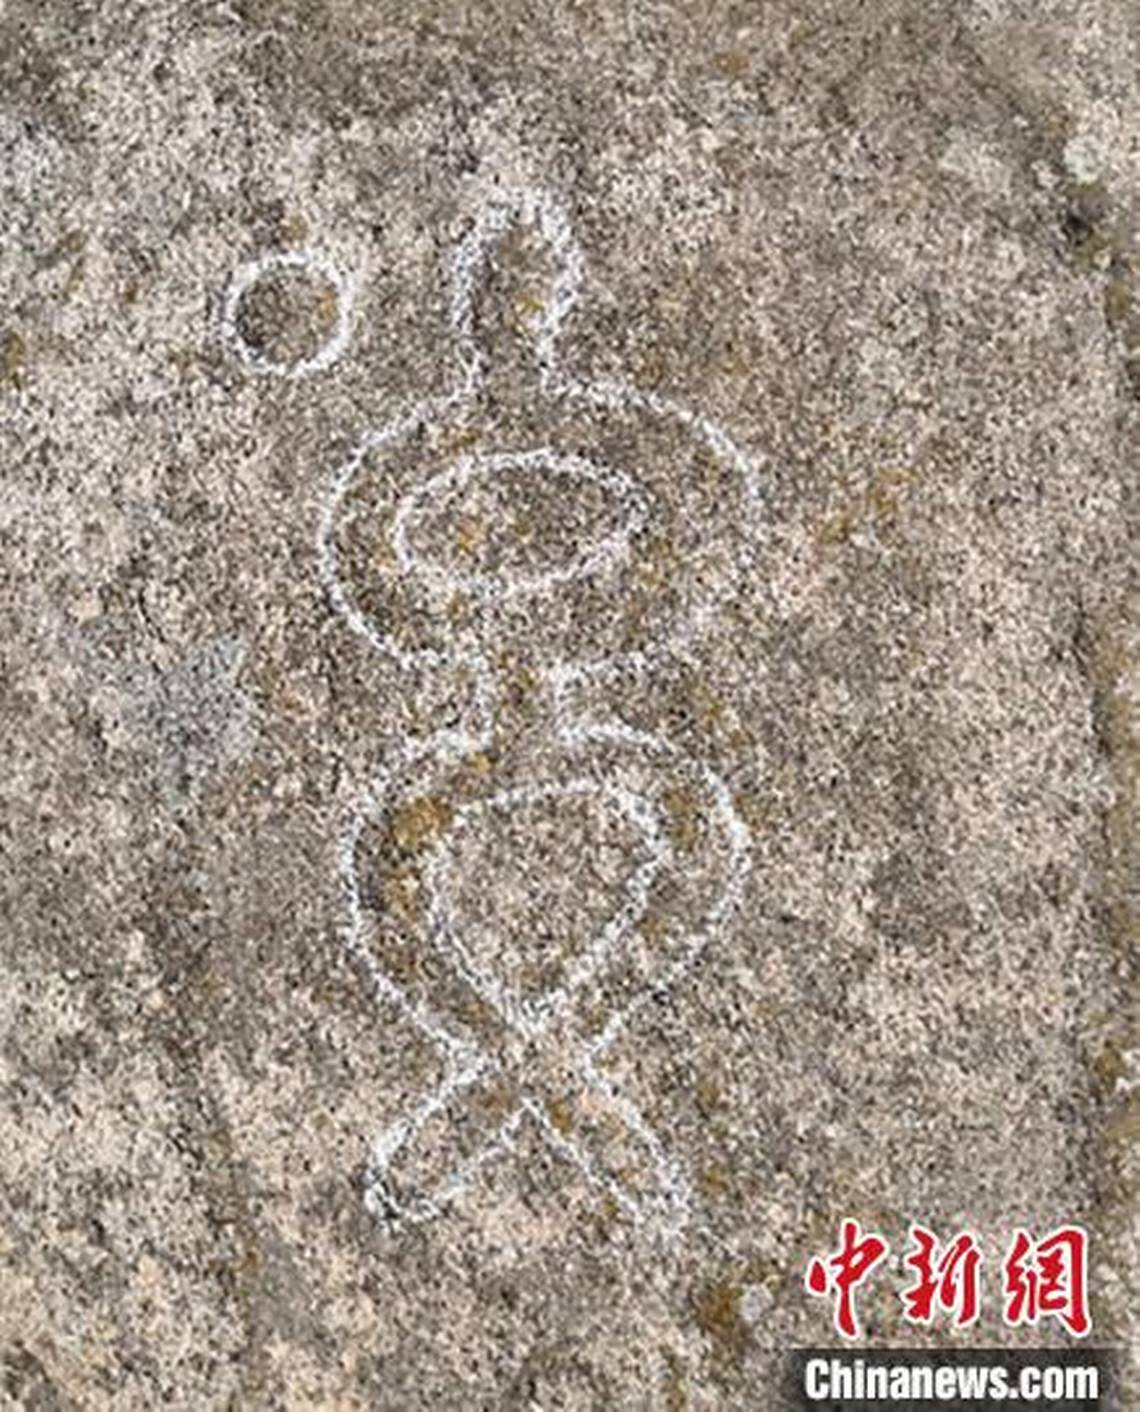 One of the rock paintings with a looping line design.